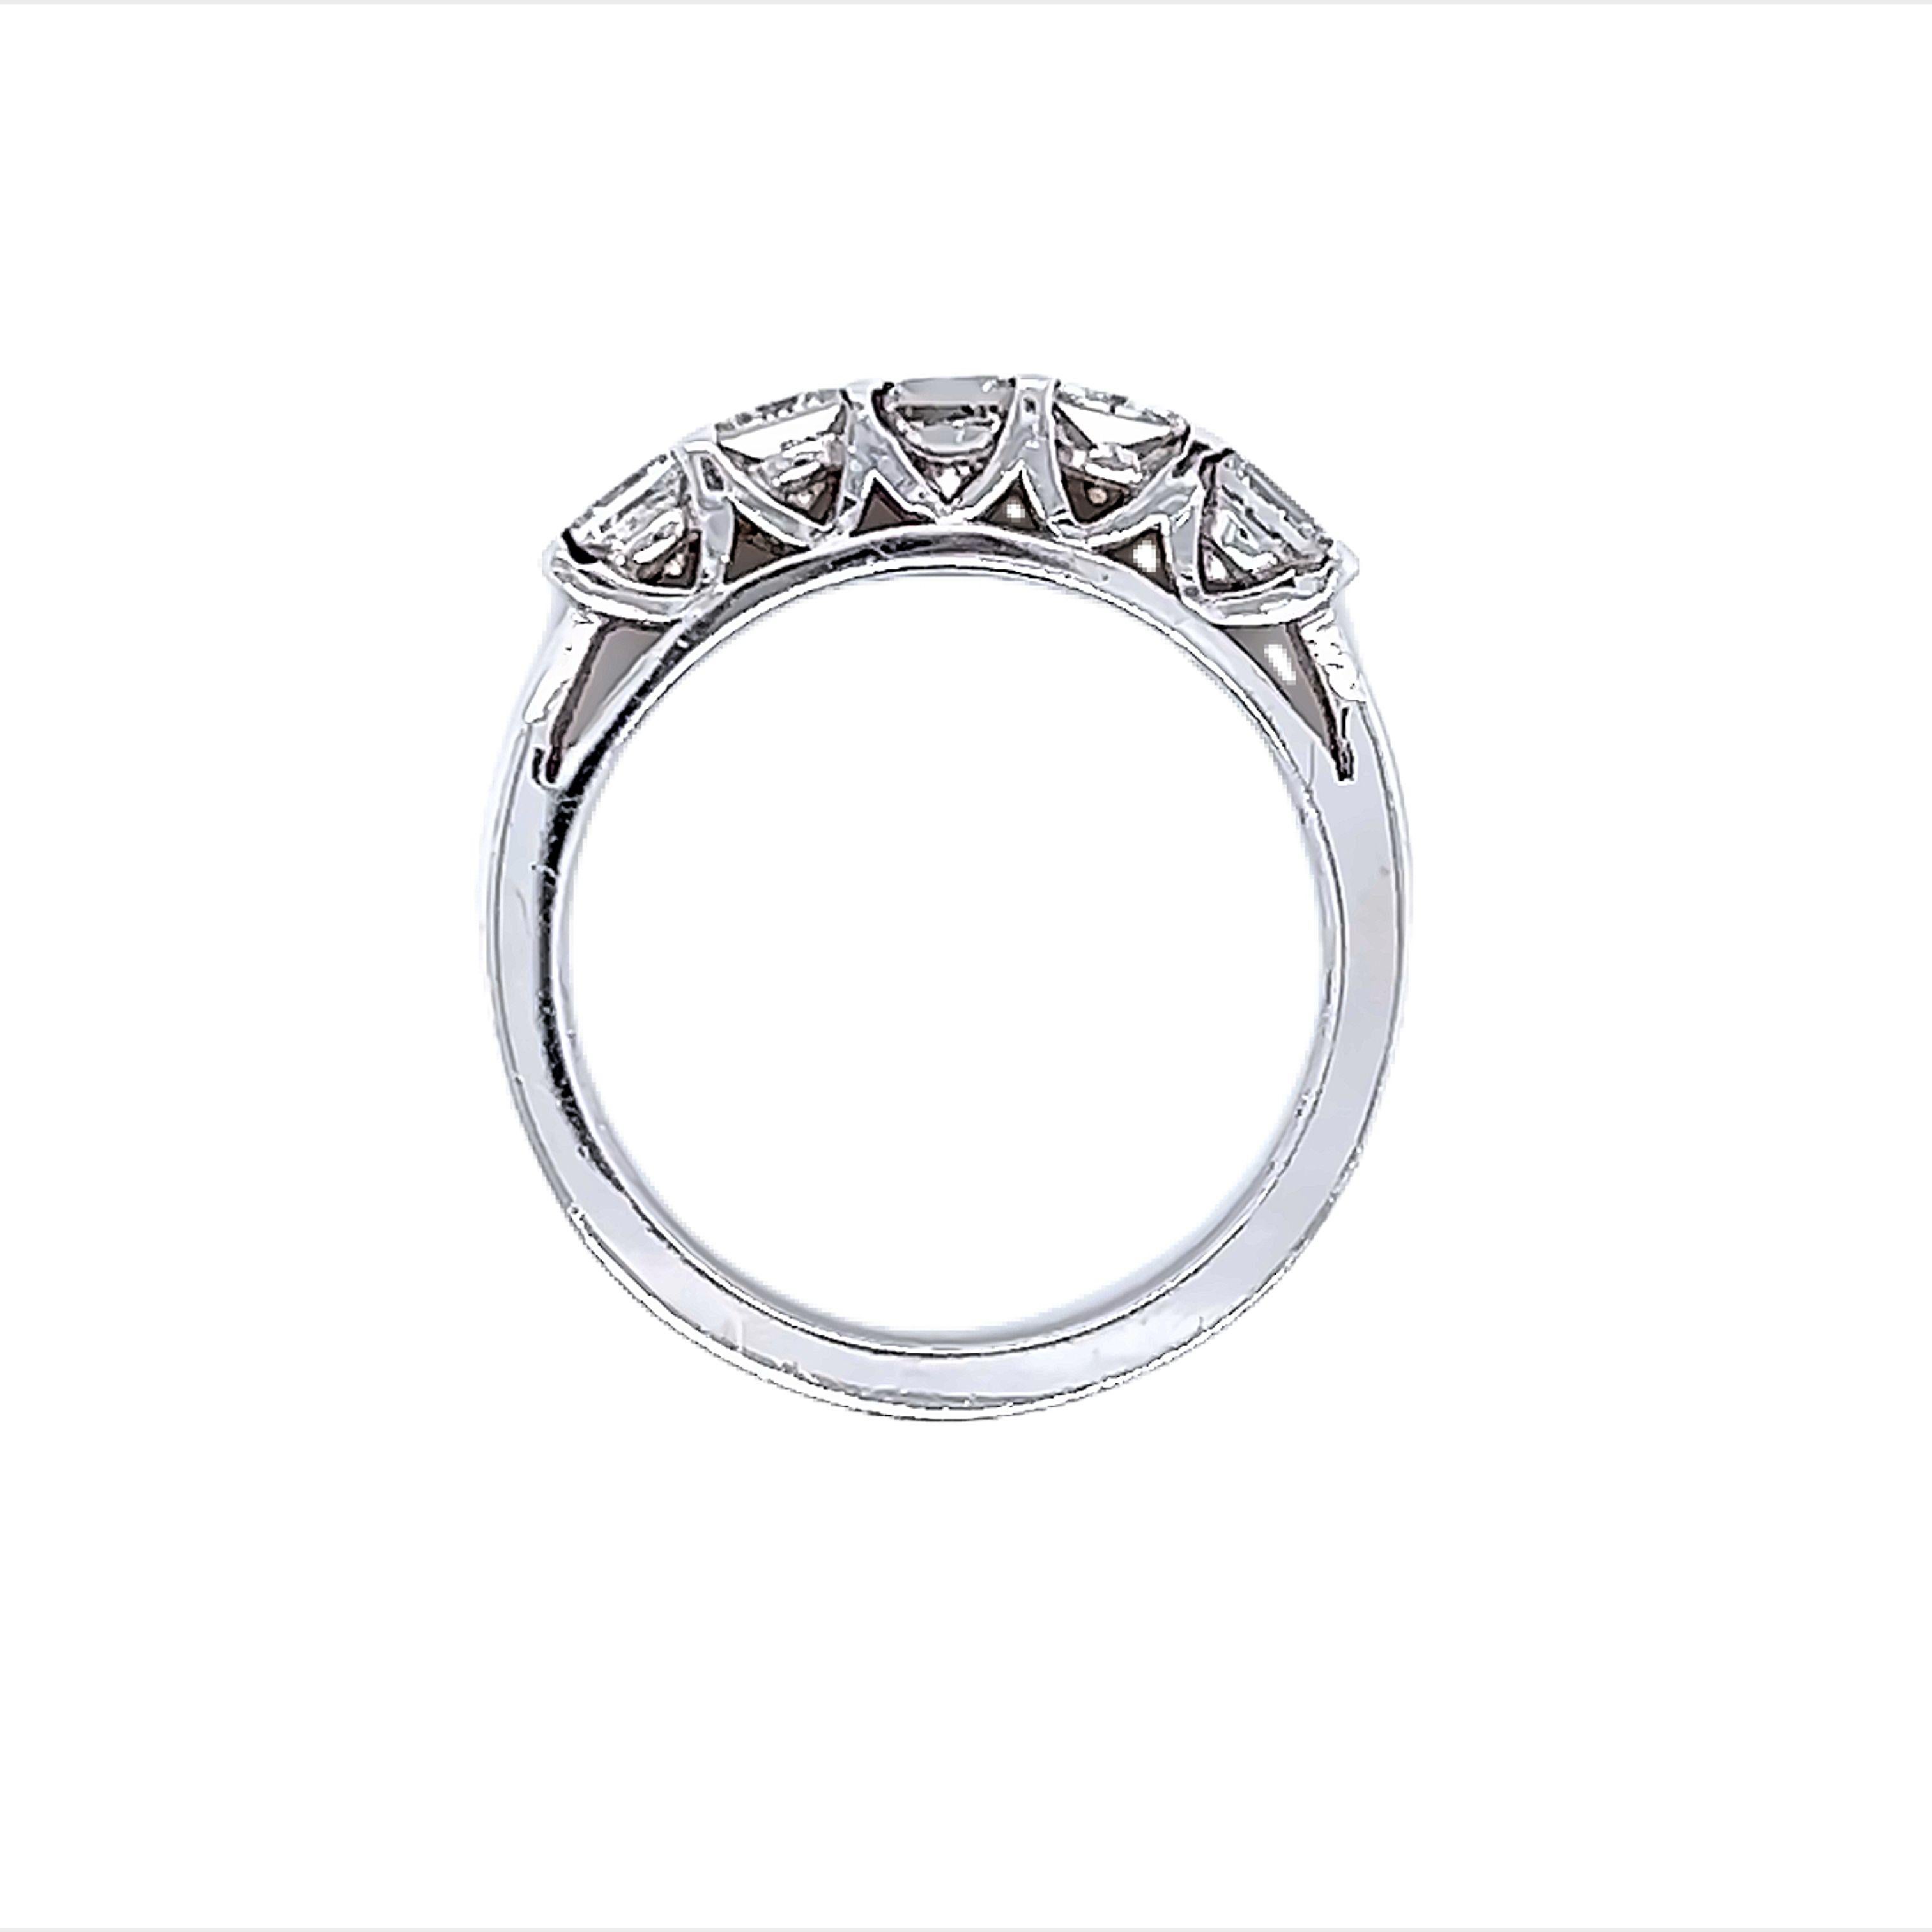 Stunning round diamond eternity band, by Alexander Beverly Hills.
5 princess cut diamonds, 0.62 carats total. H color and VS clarity. Set in 18k white gold, 4.09 grams, size 6.5. 
Accommodated with an up-to-date digital appraisal by a GIA G.G. once